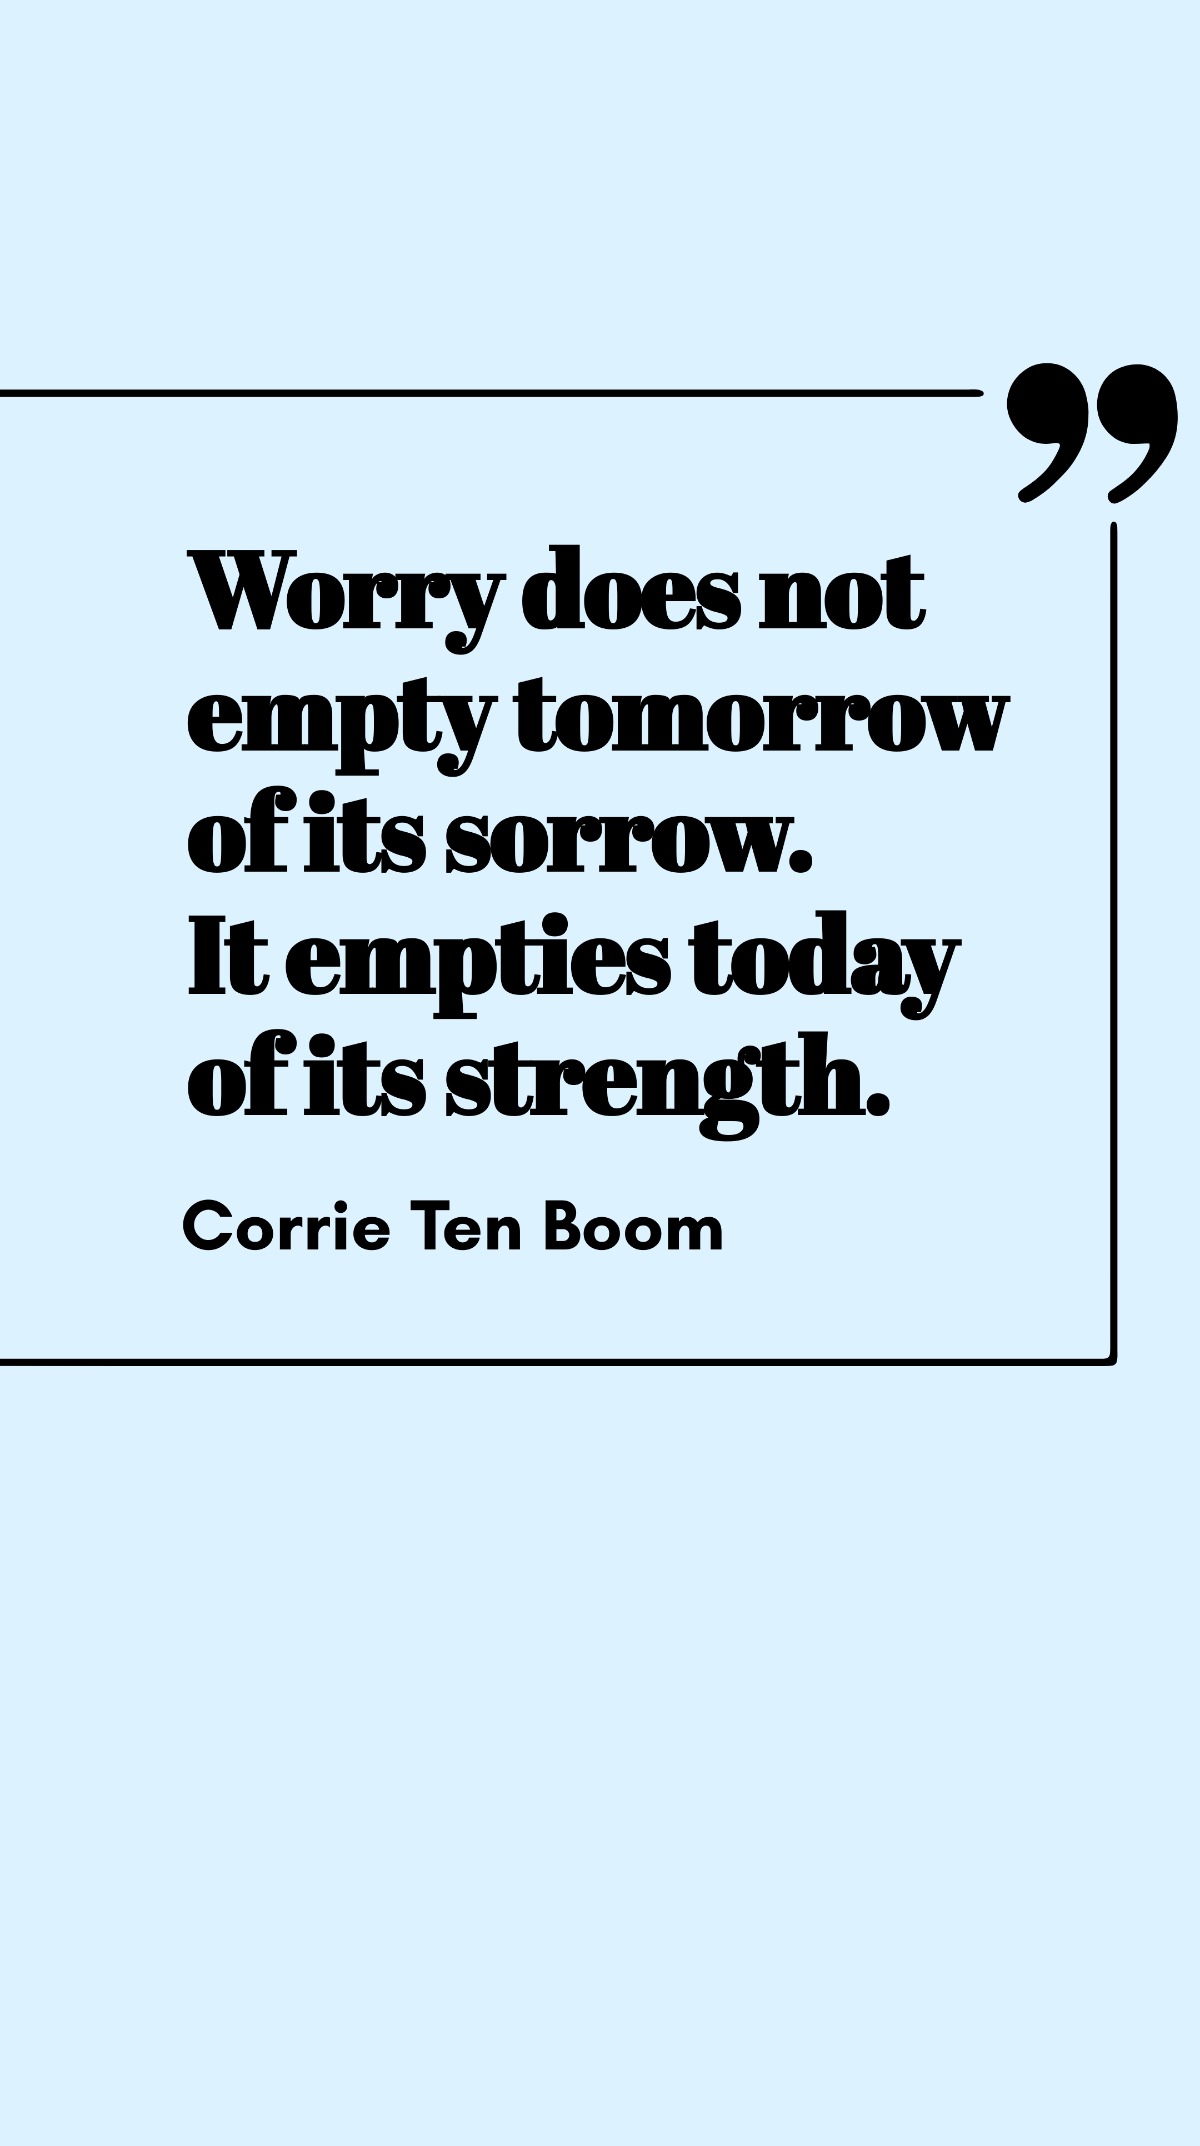 Corrie Ten Boom - Worry does not empty tomorrow of its sorrow. It empties today of its strength. Template